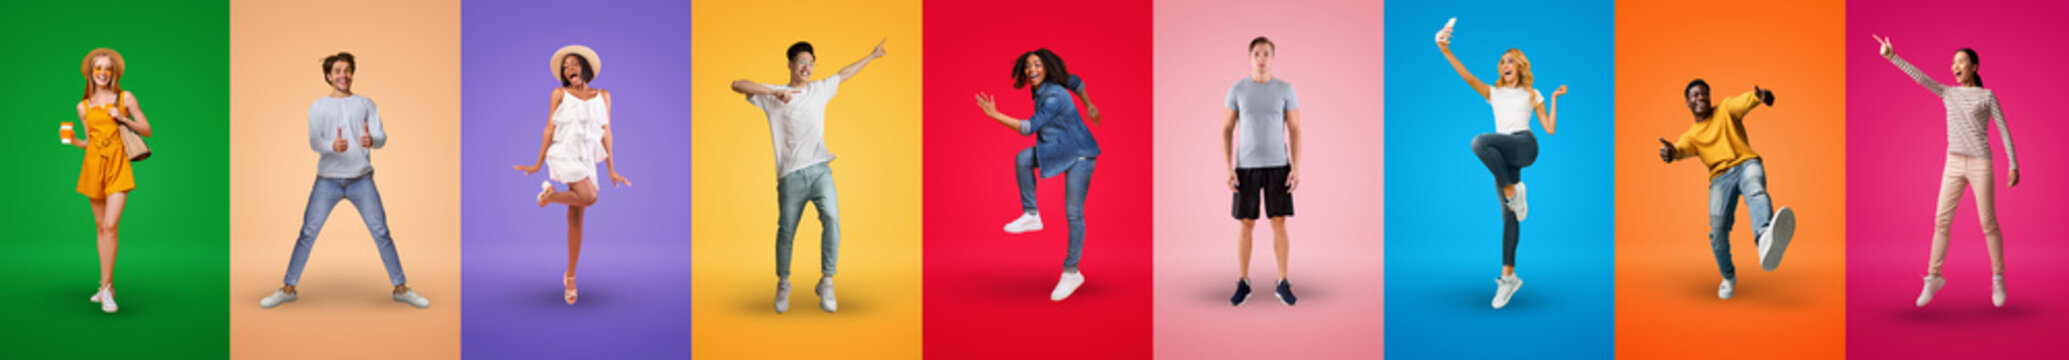 Multiracial millennials posing on colorful backgrounds, collection of studio photos